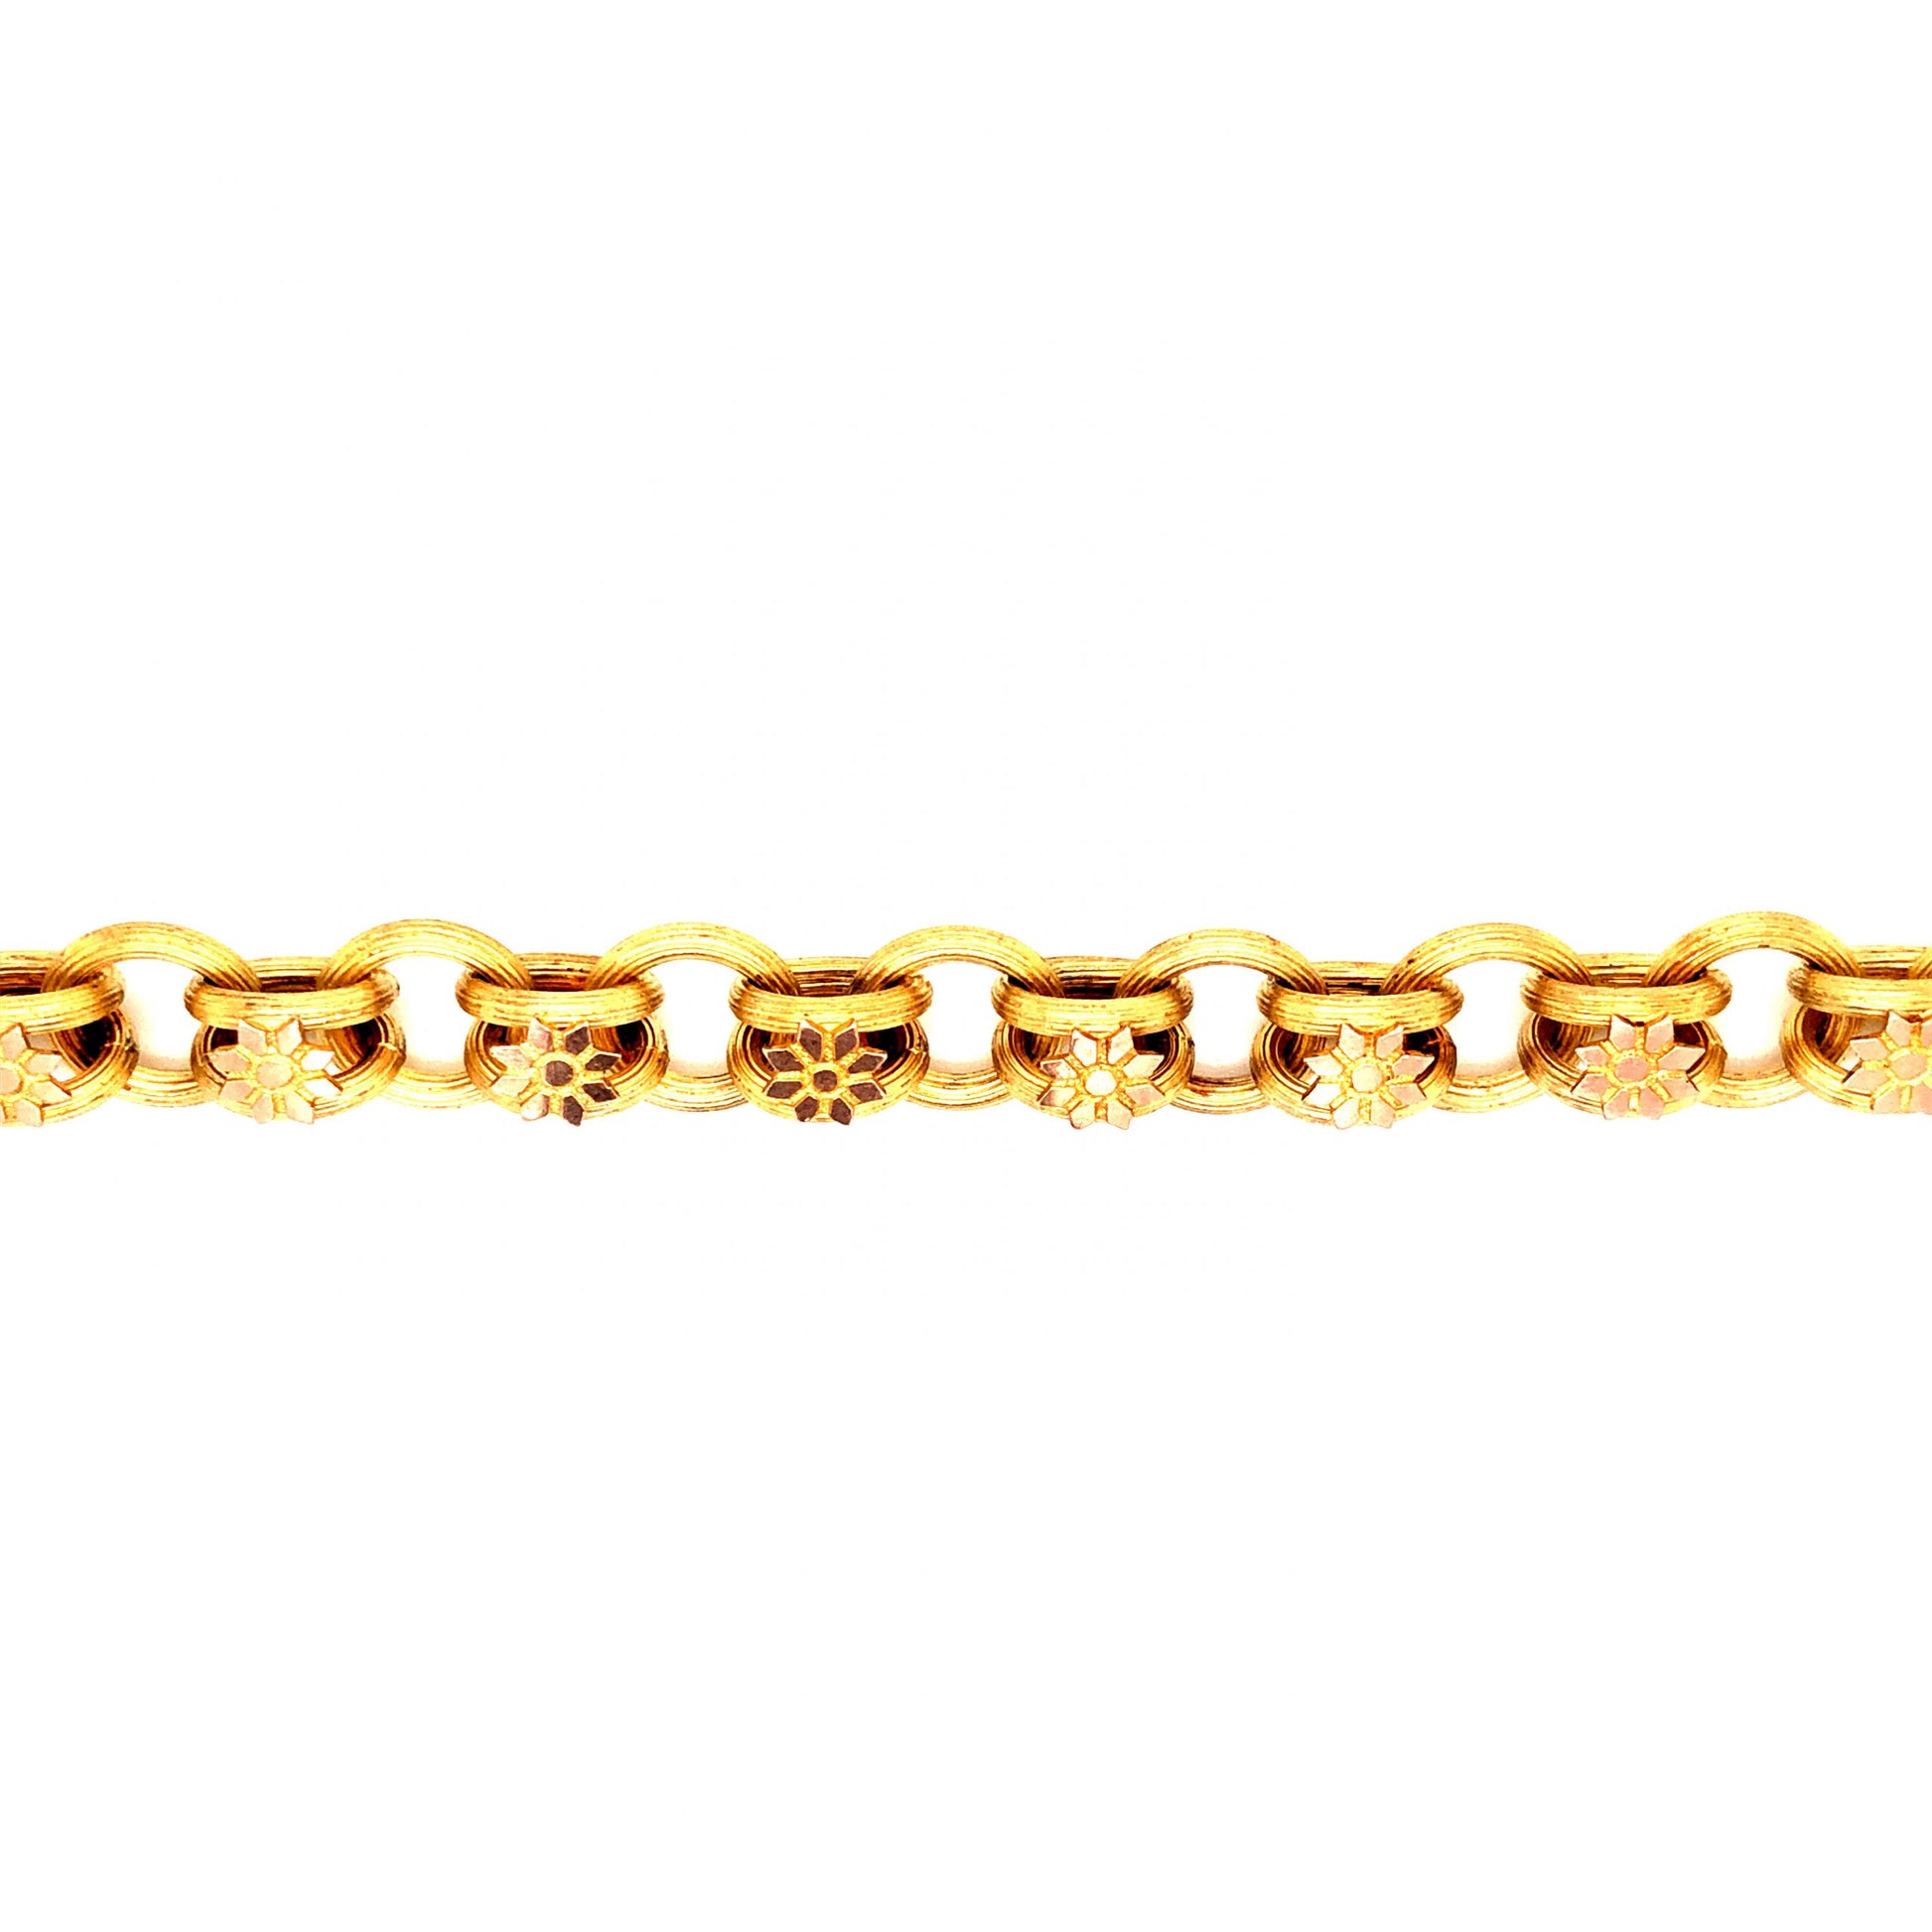 Antique Victorian Floral Chain Padlock Bracelet in 14k Yellow Gold